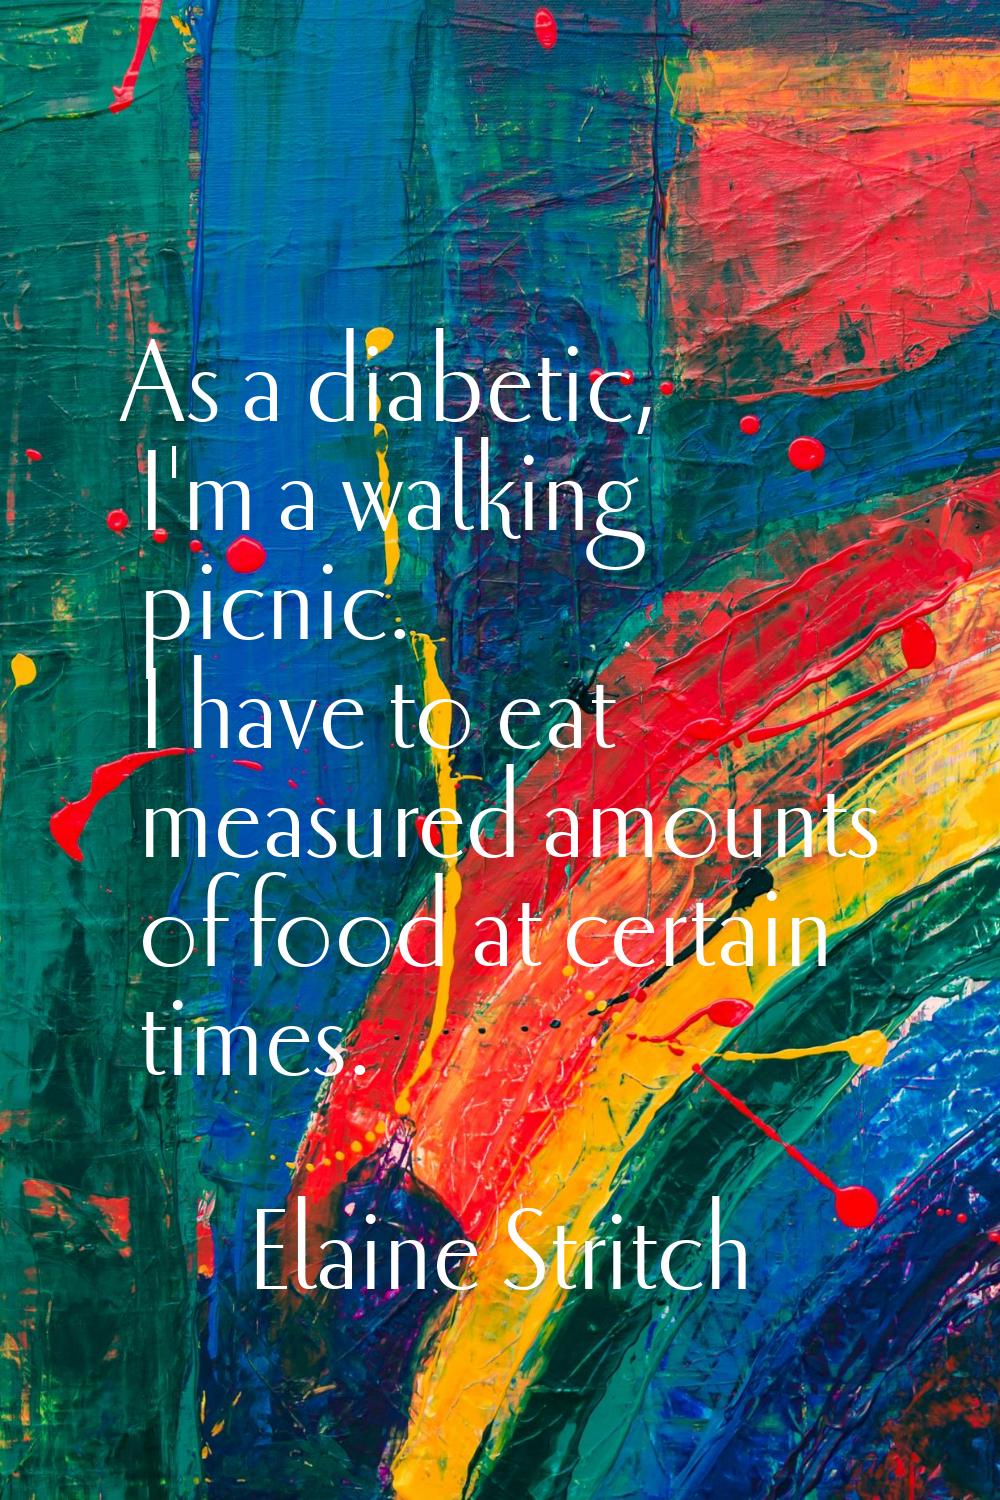 As a diabetic, I'm a walking picnic. I have to eat measured amounts of food at certain times.